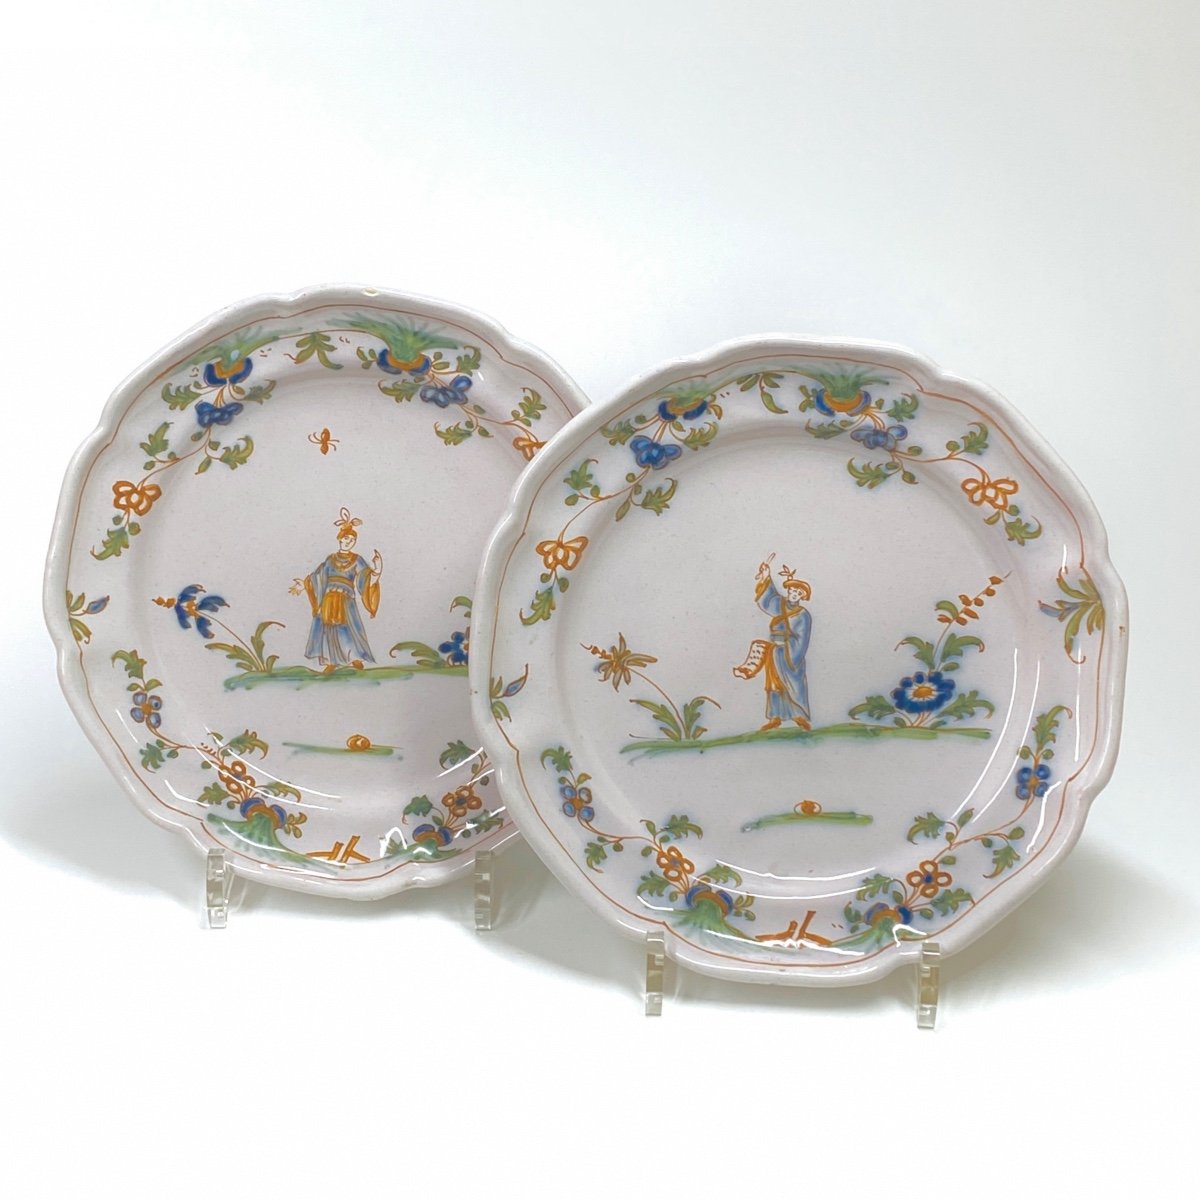 Lyon - Pair Of Plates Decorated With Characters Dressed In The Oriental Style - 18th Century